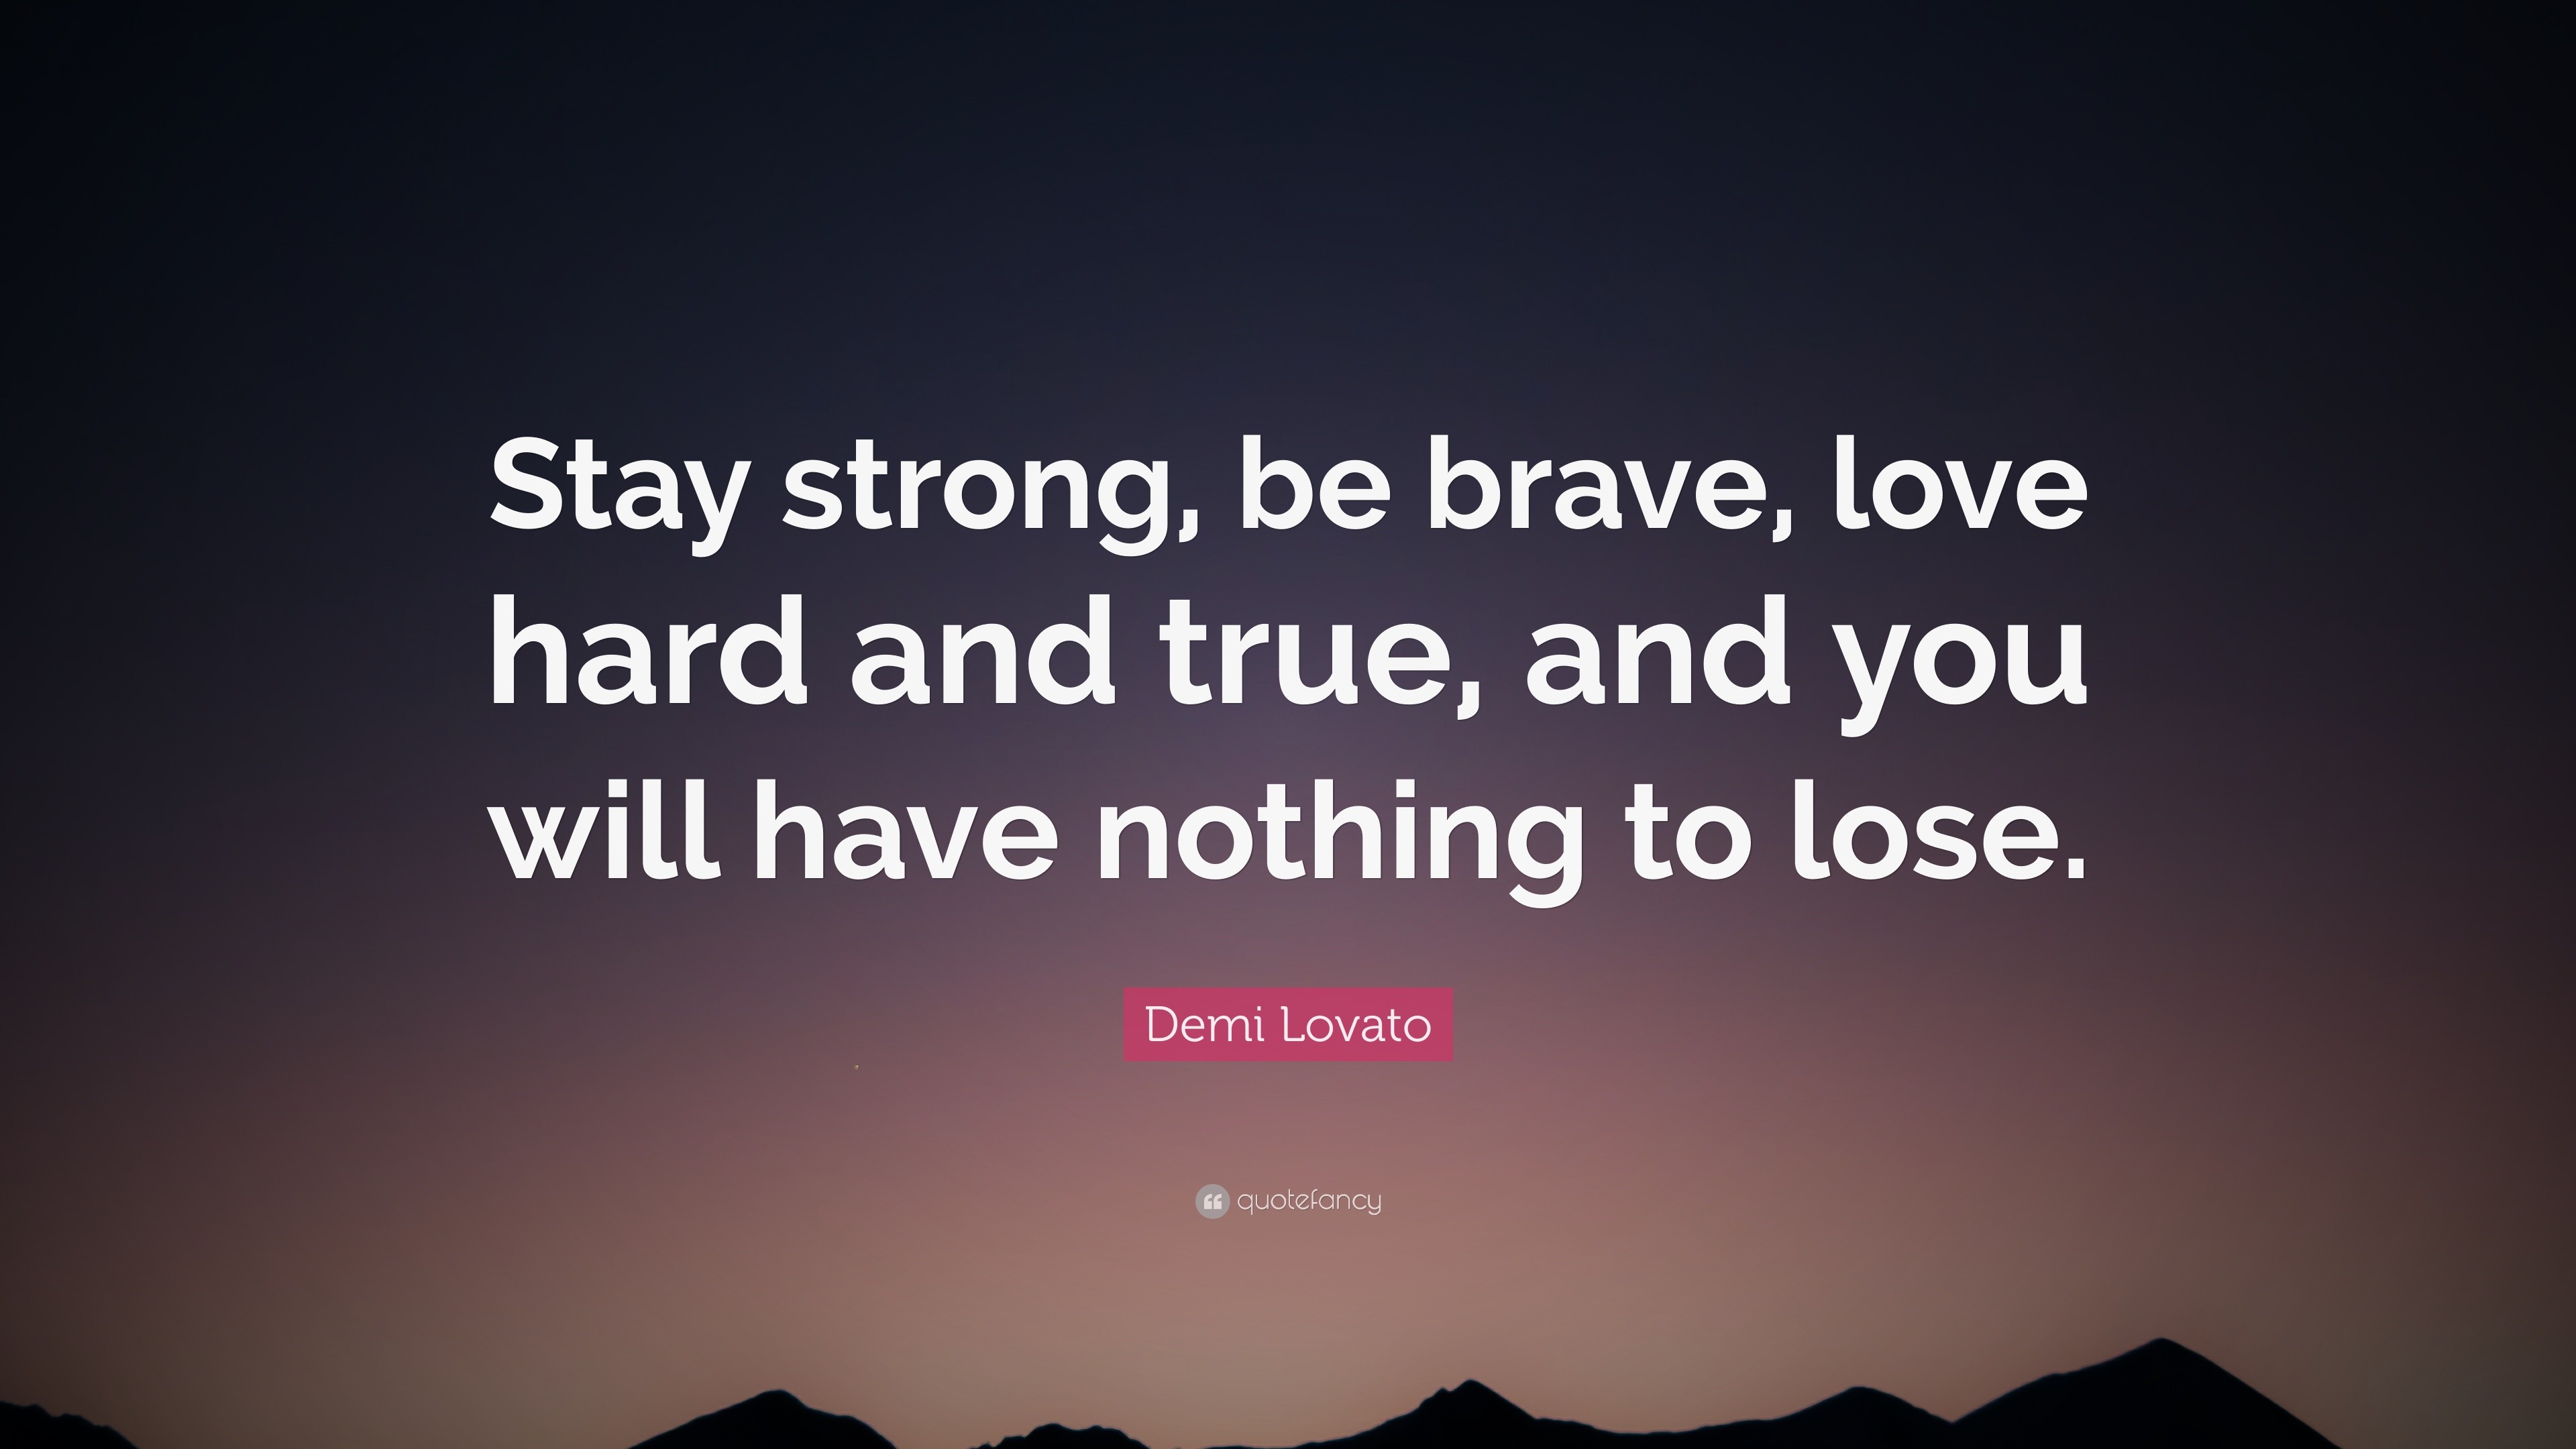 Demi Lovato Quote “Stay strong be brave love hard and true